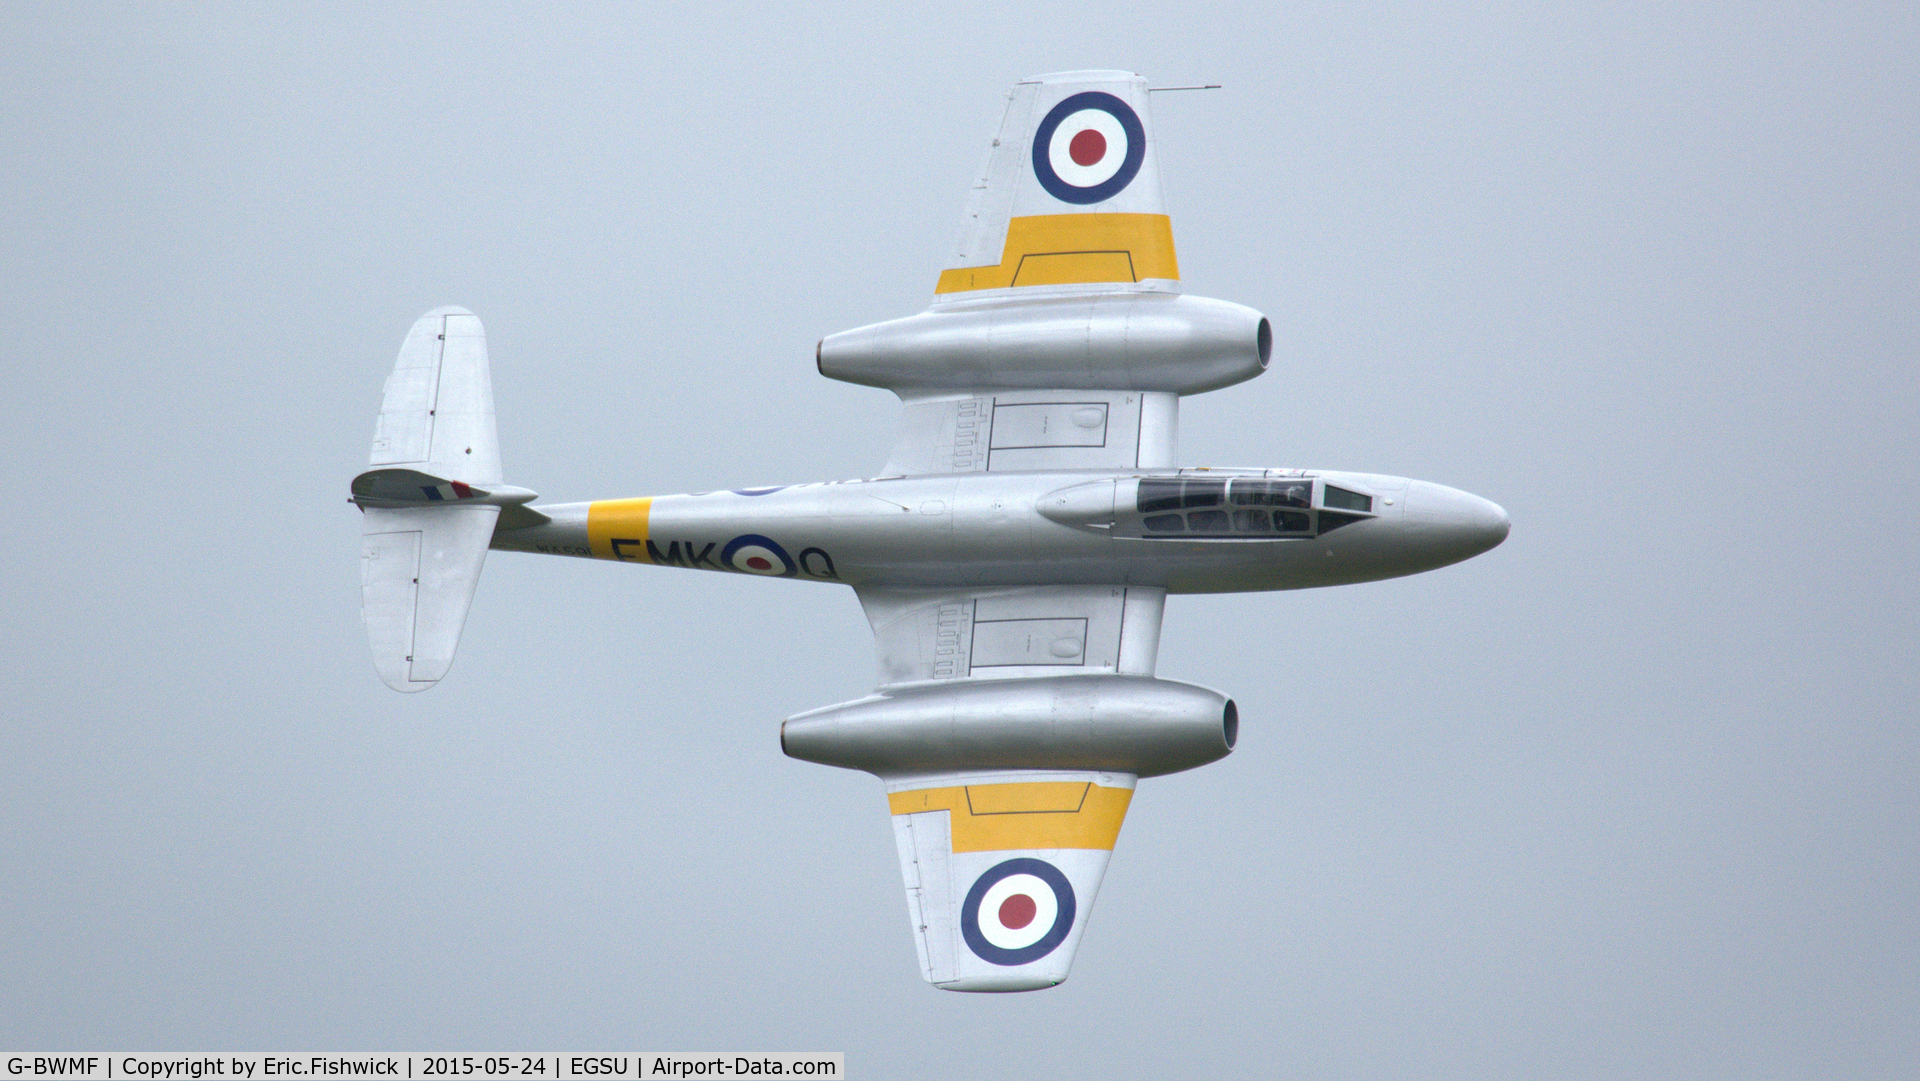 G-BWMF, 1949 Gloster Meteor T.7 C/N G5/356460, 42. G-BWMF - superb display at The IWM VE Day Anniversary Air Show, May 2015.